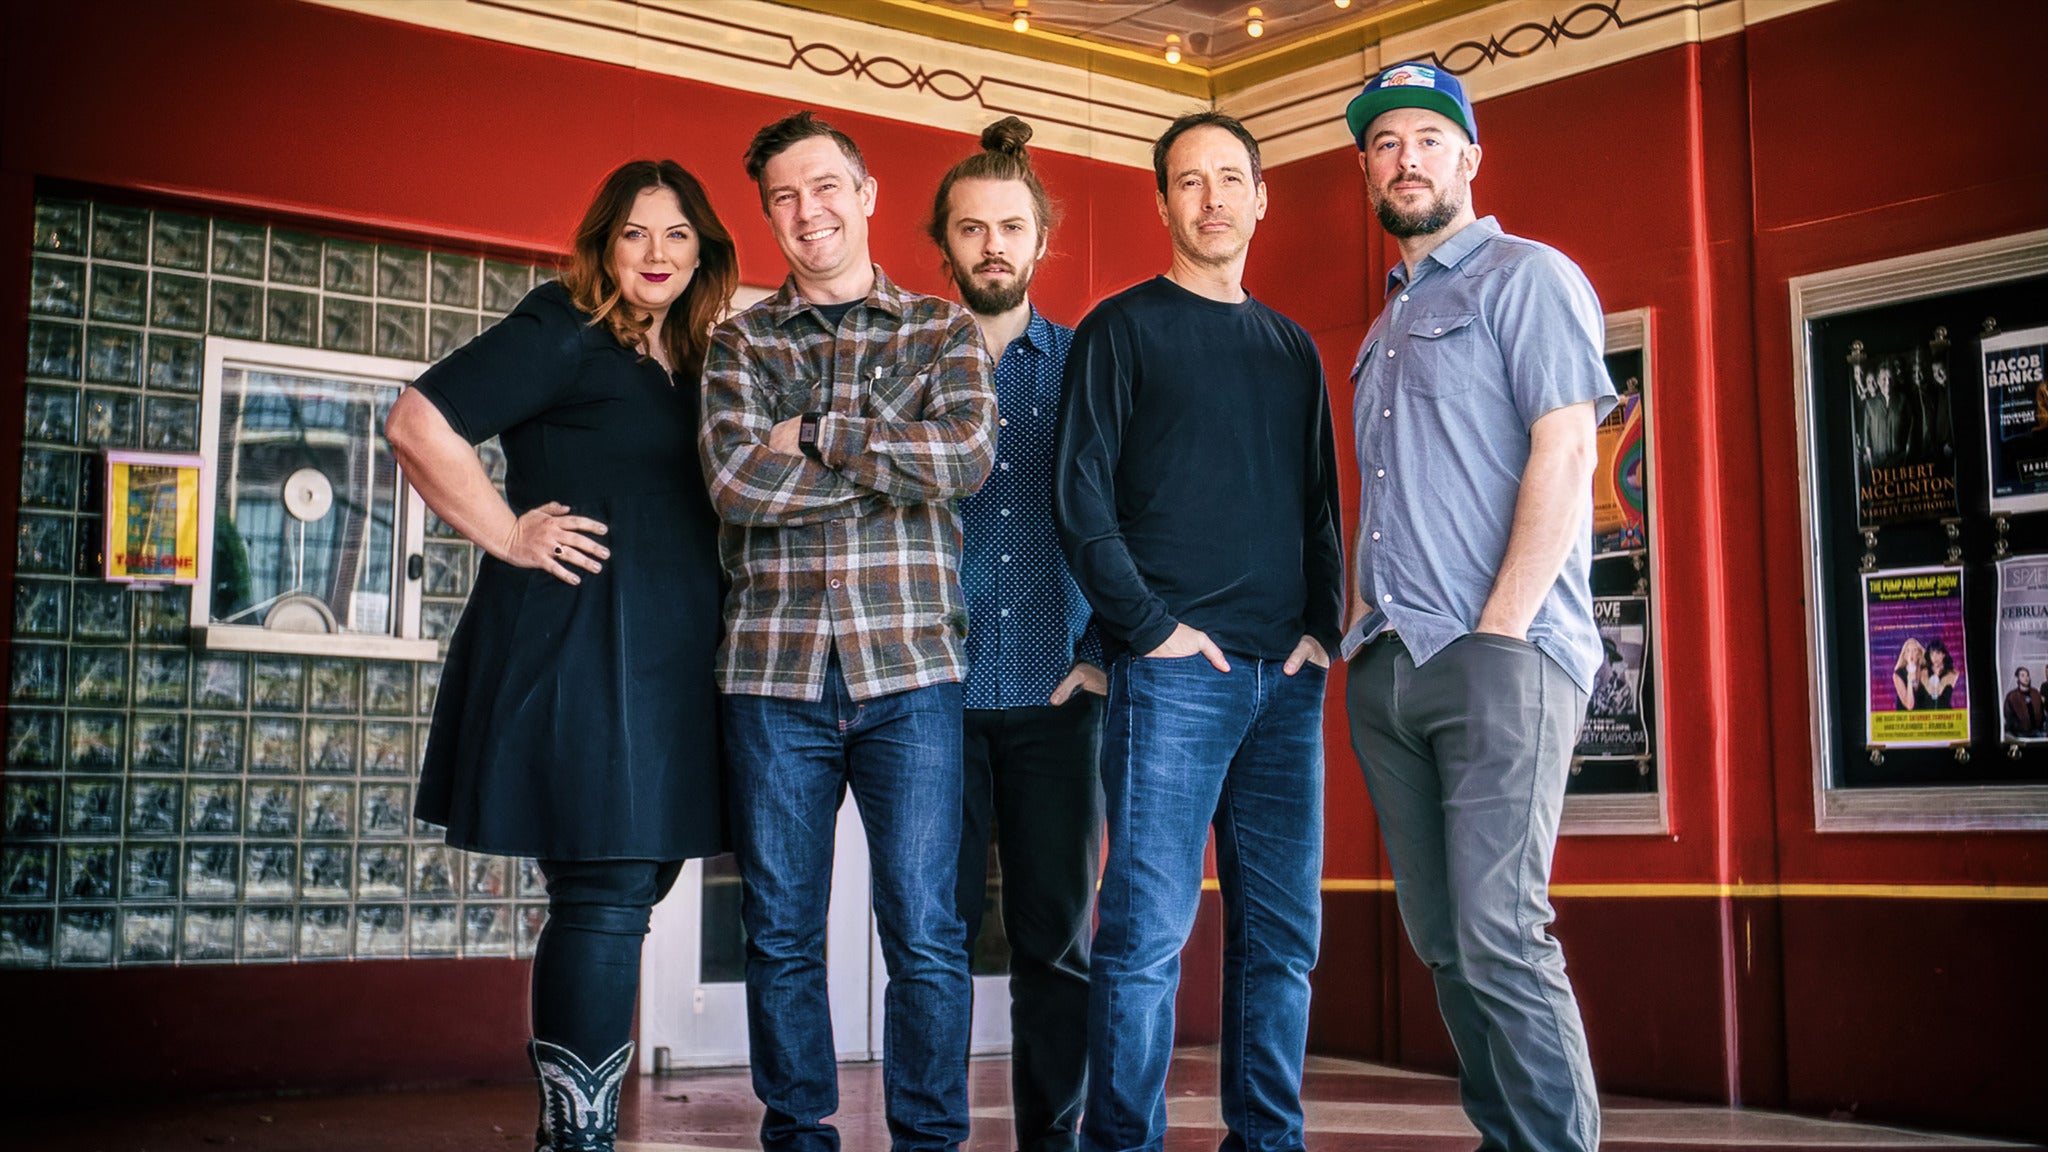 Image used with permission from Ticketmaster | Yonder Mountain String Band tickets